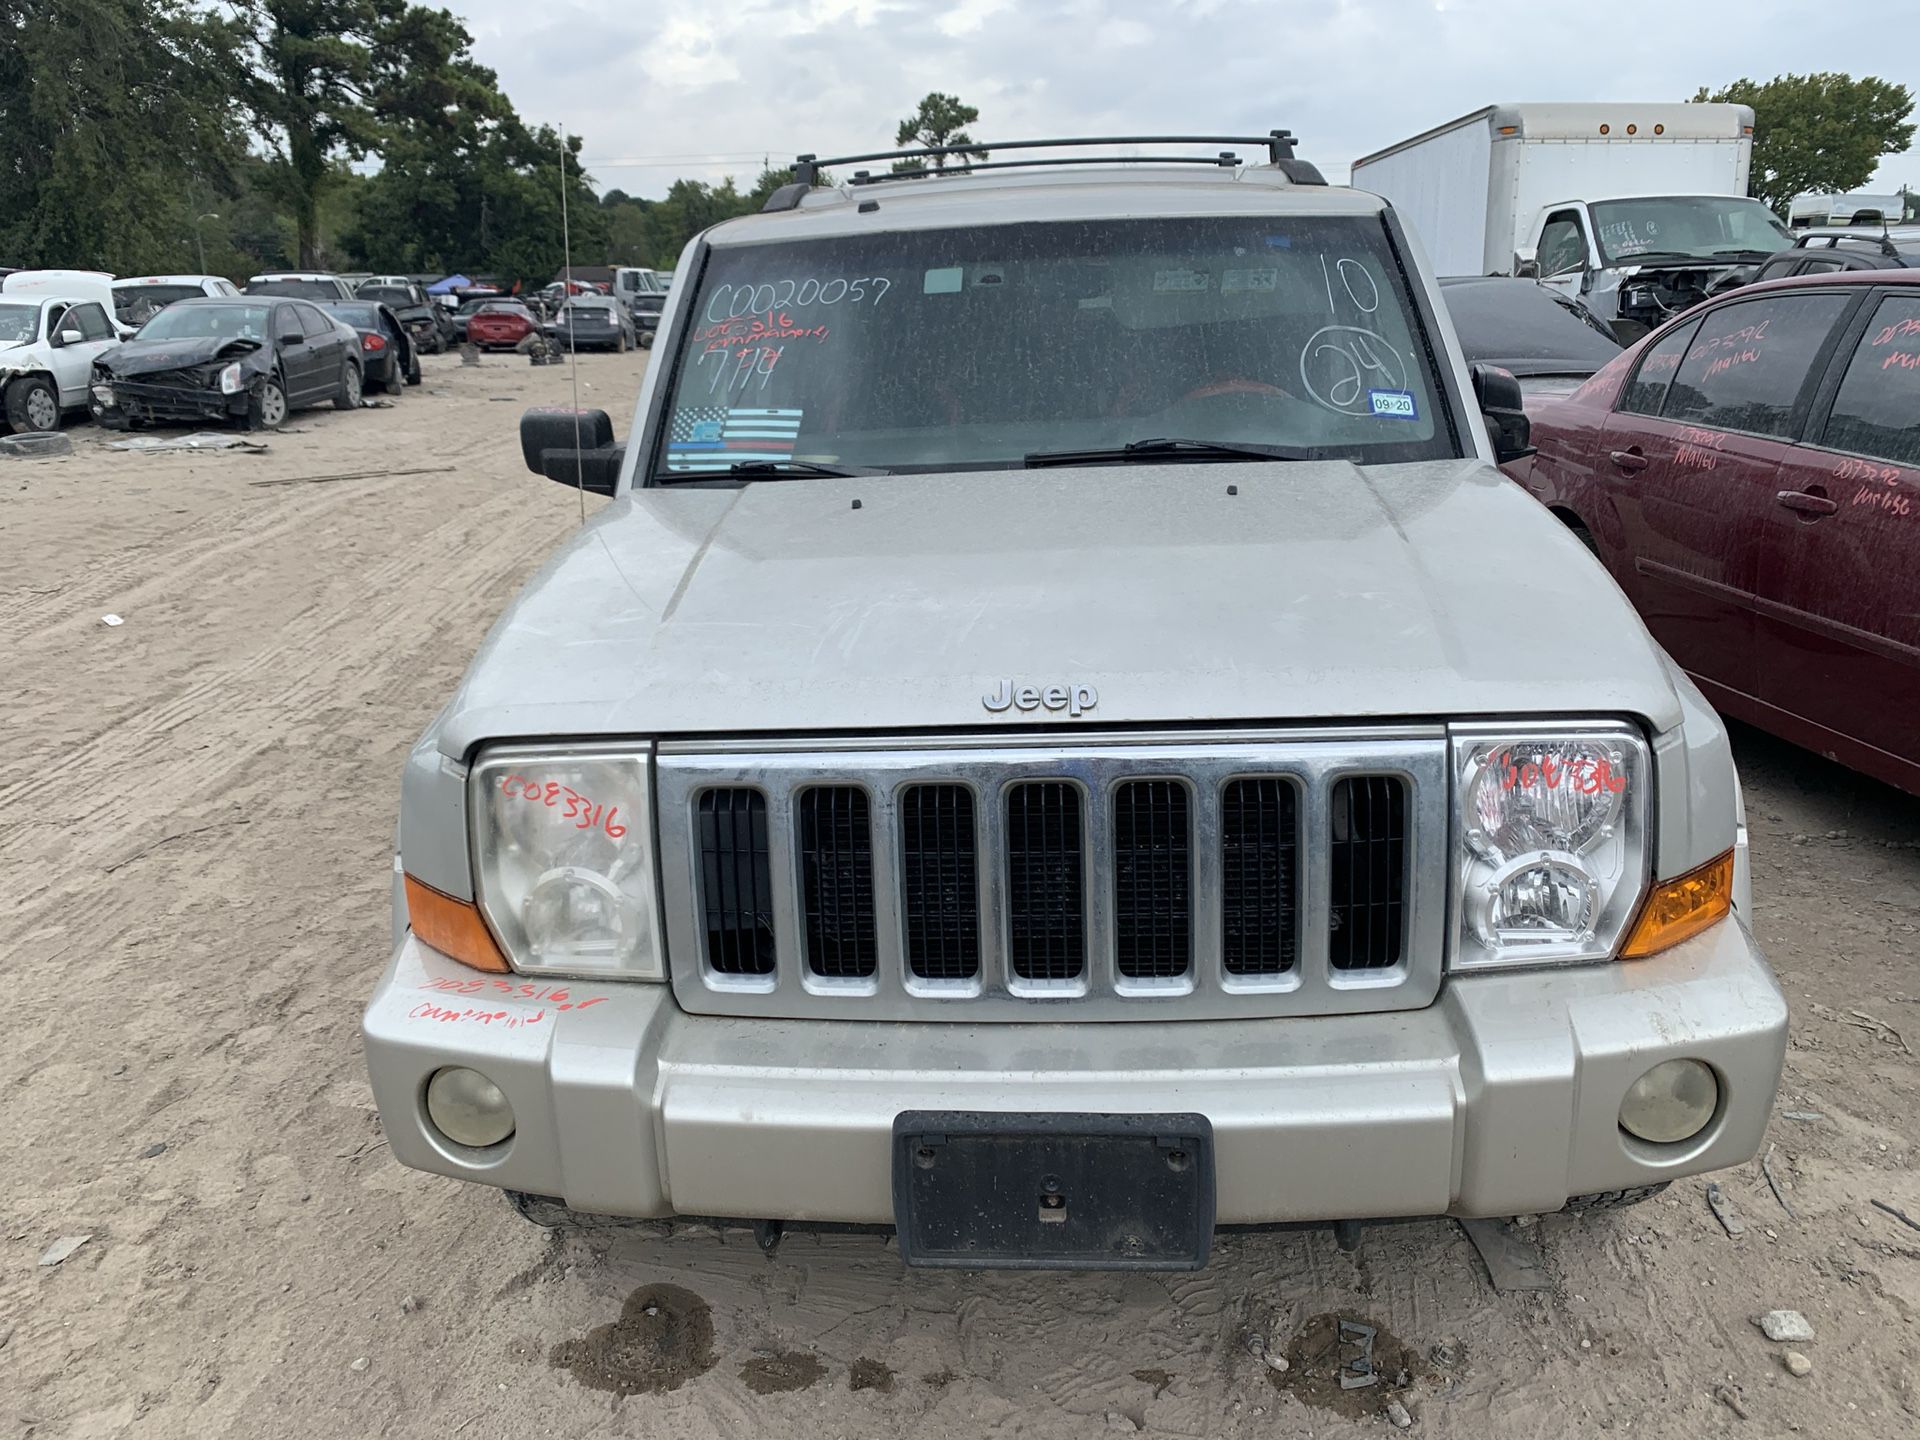 2008 Jeep Commander 5.7 Engine - For Parts